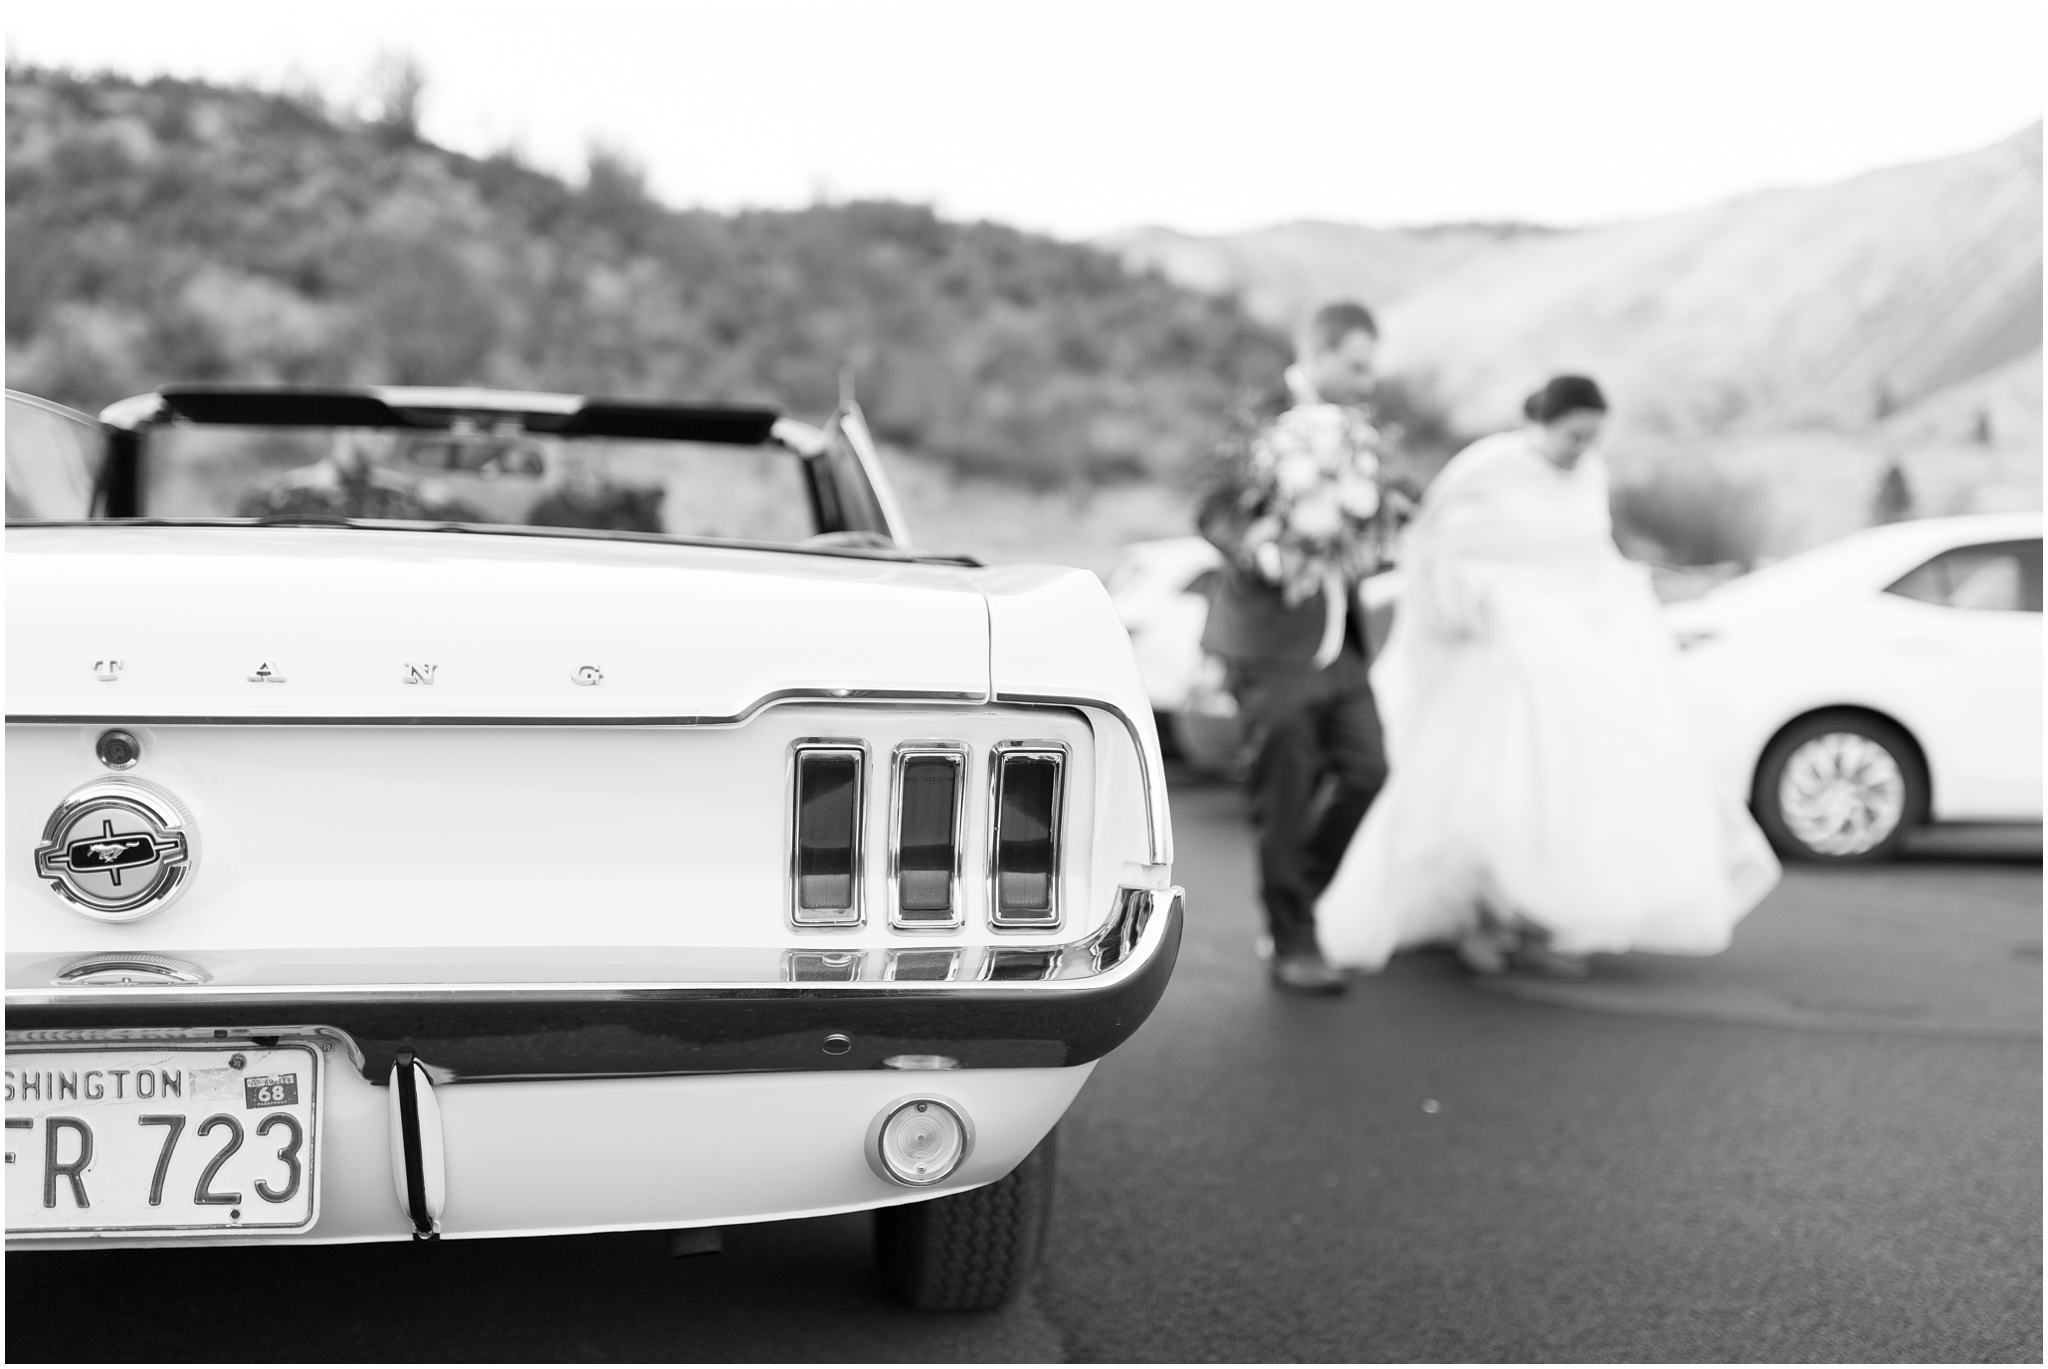 This American Homestead wedding was a Yakima wedding captured by Spokane wedding photographer Taylor Rose Photography at one of the best Yakima wedding venues, the American Homestead. Taylor Rose Photography is a Northern Virginia Wedding photographer and DC wedding photographer capturing weddings, engagement sessions and anniversaries across the U.S. and beyond. Including a vintage getaway car - mustang.